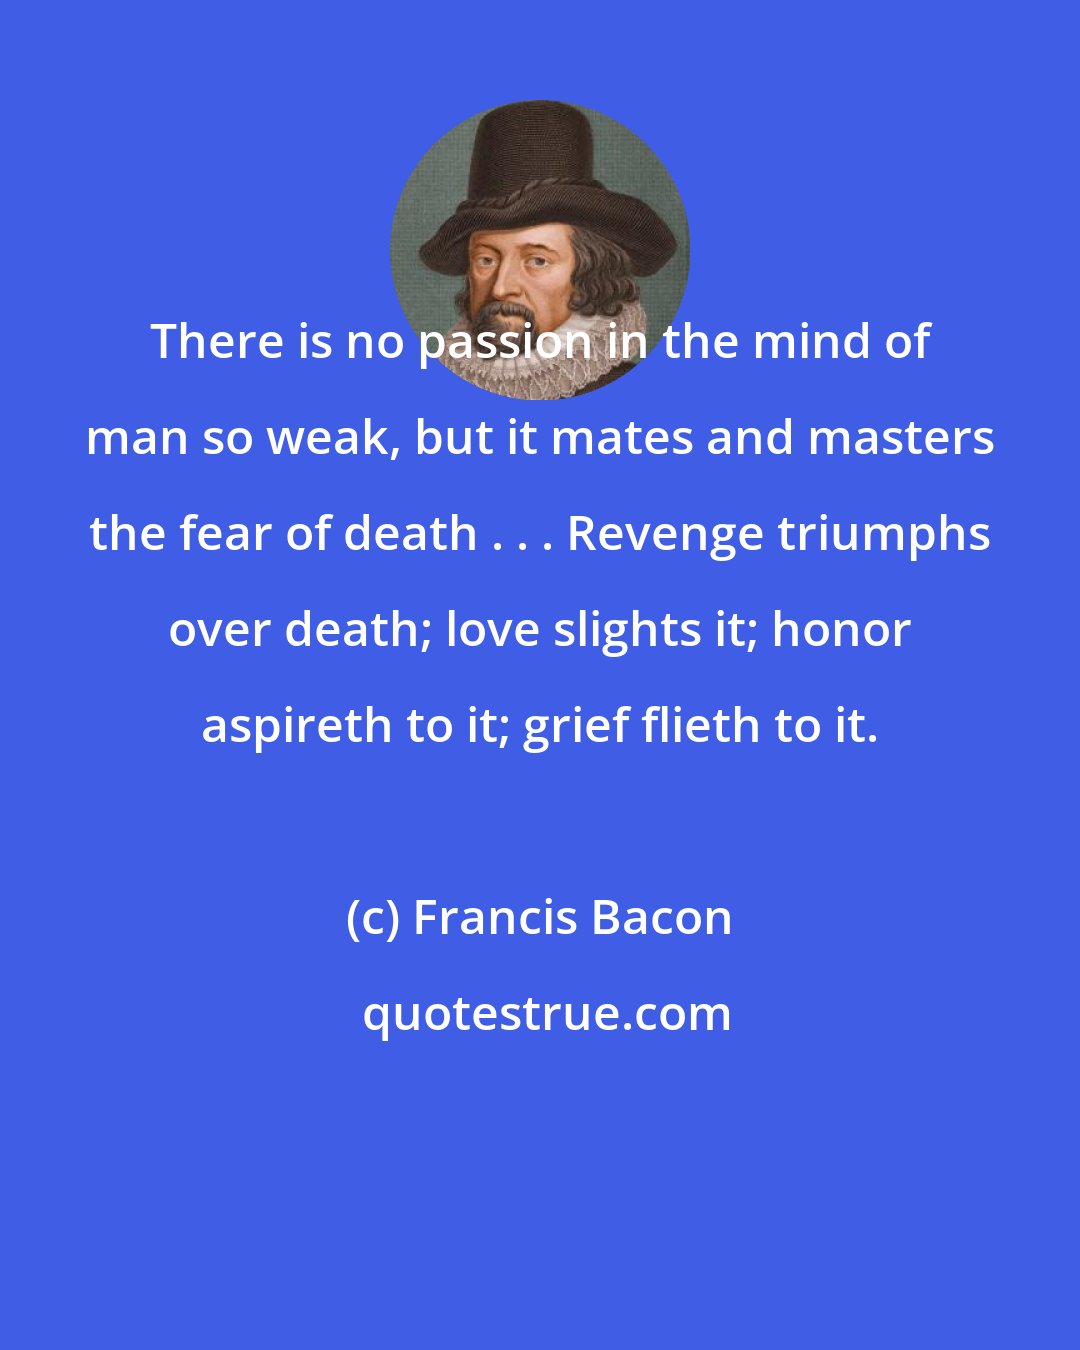 Francis Bacon: There is no passion in the mind of man so weak, but it mates and masters the fear of death . . . Revenge triumphs over death; love slights it; honor aspireth to it; grief flieth to it.